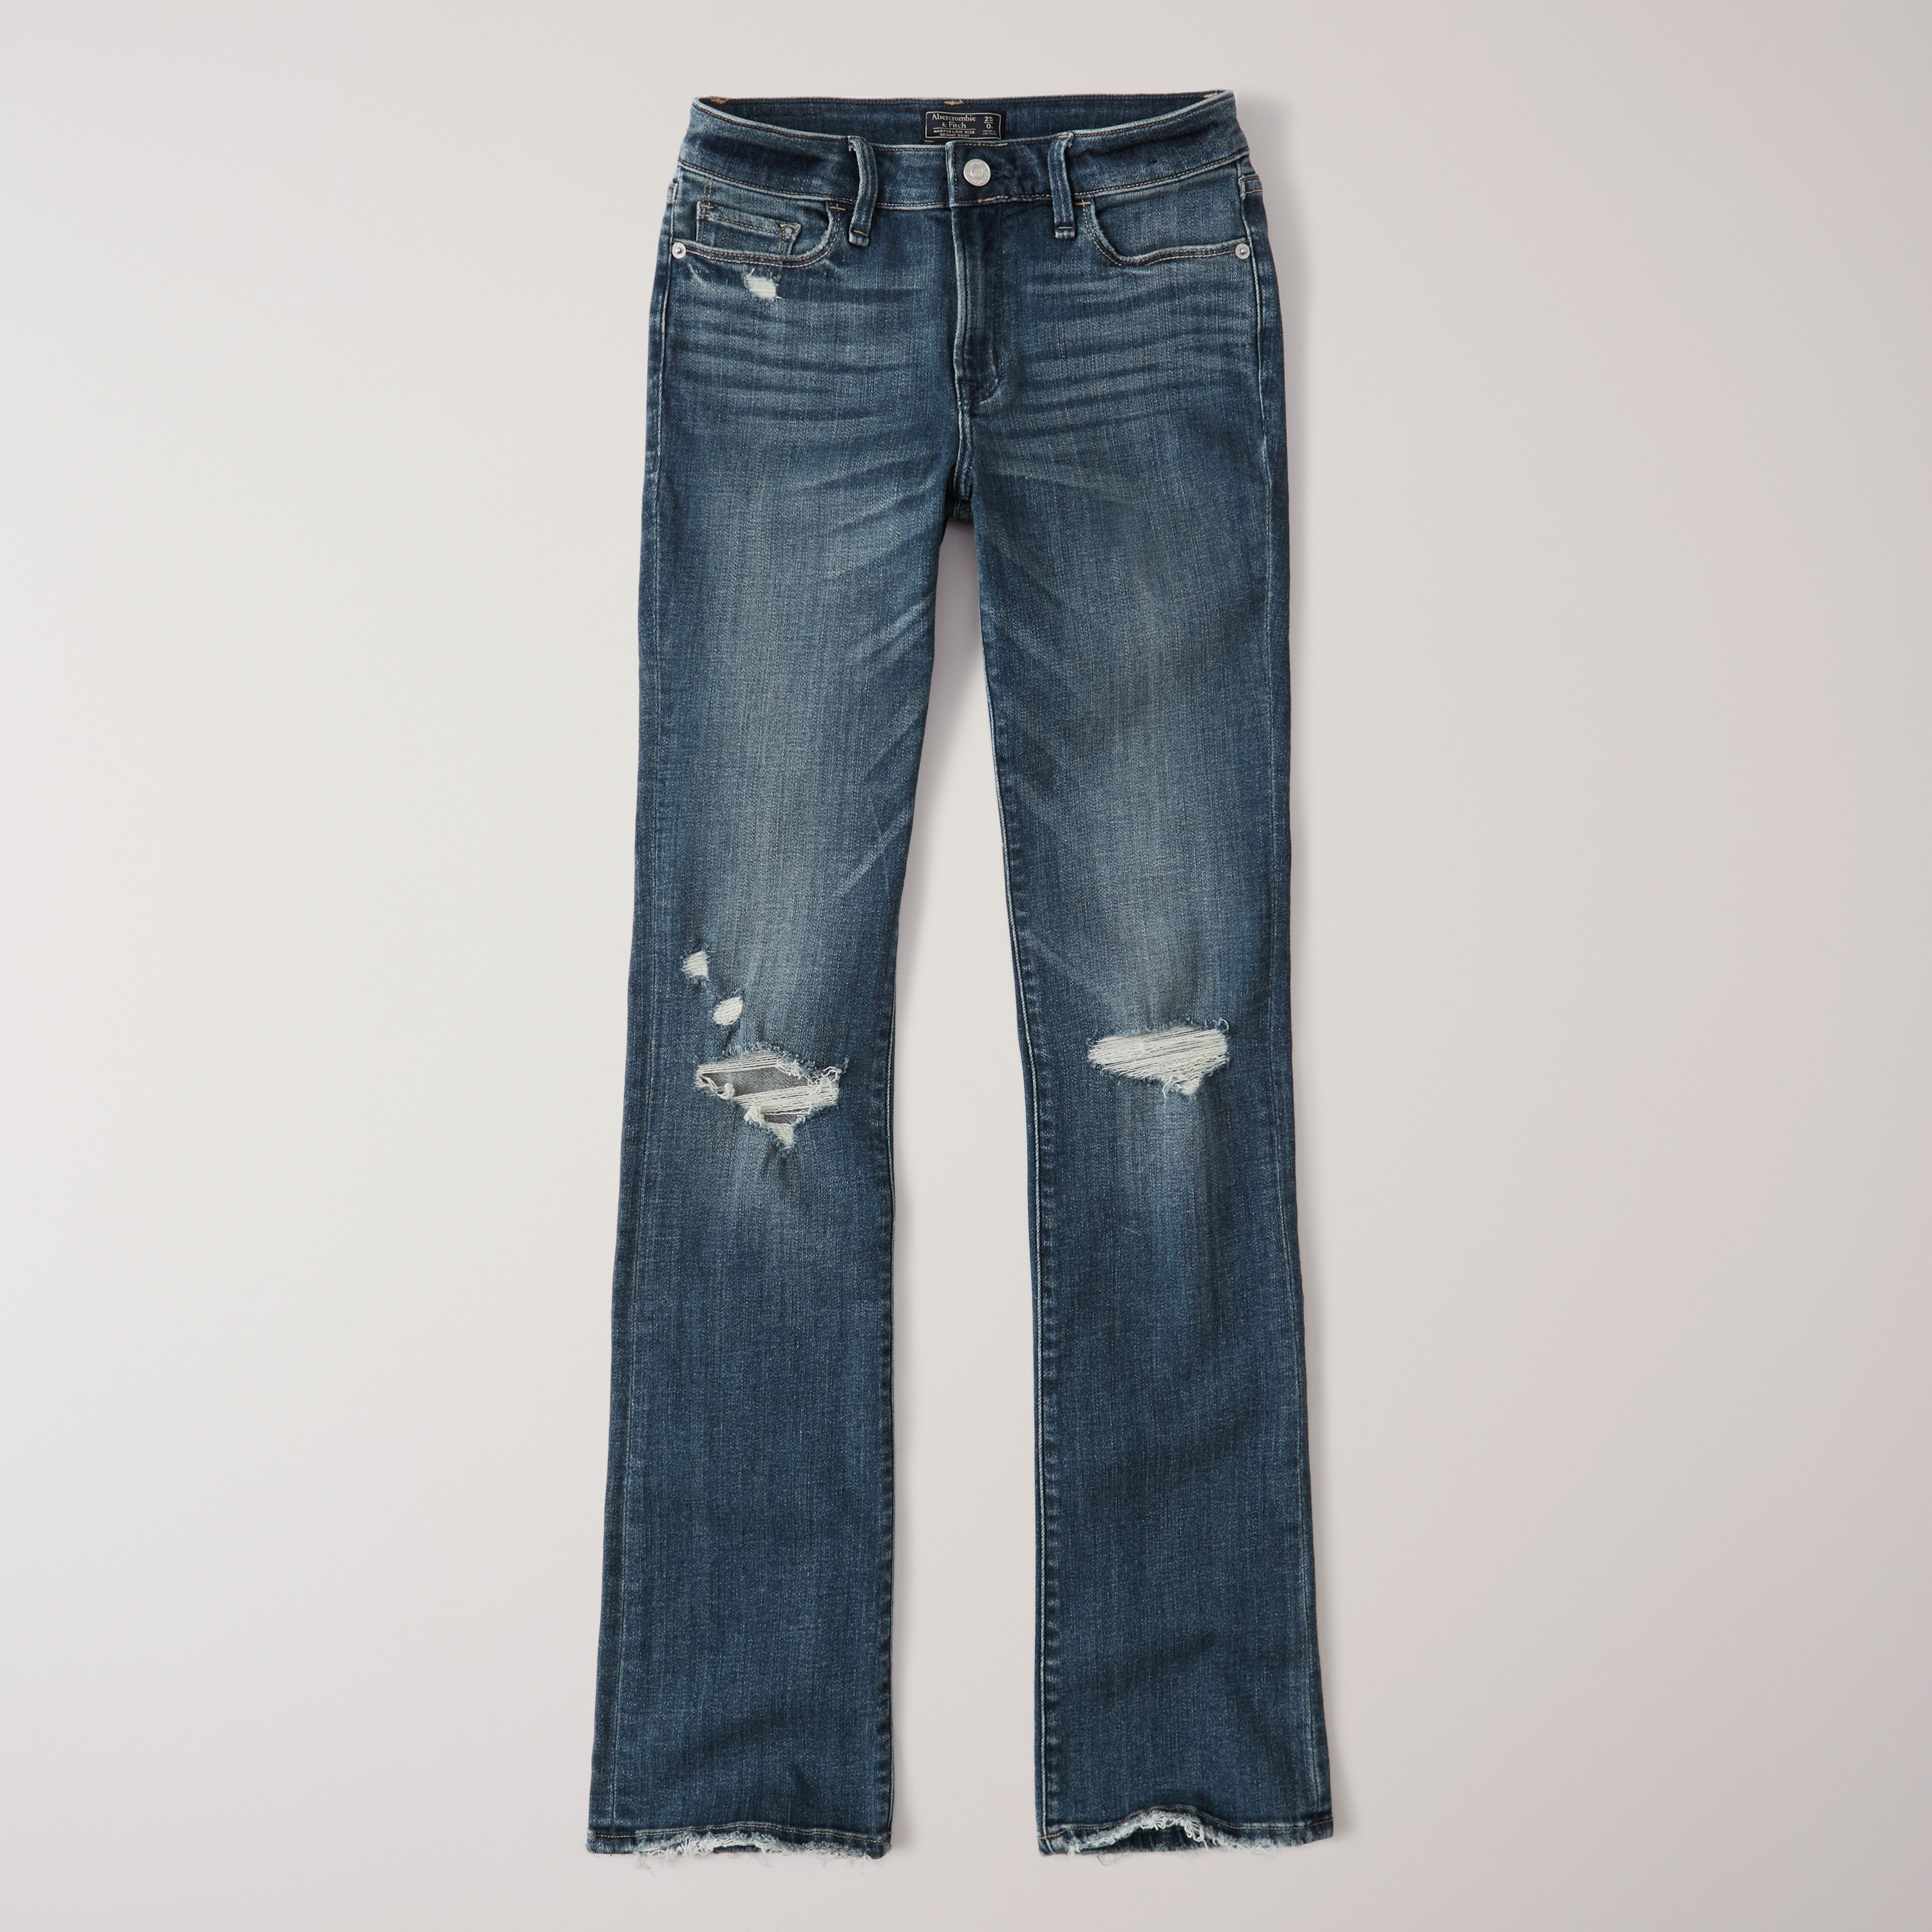 abercrombie bootcut jeans